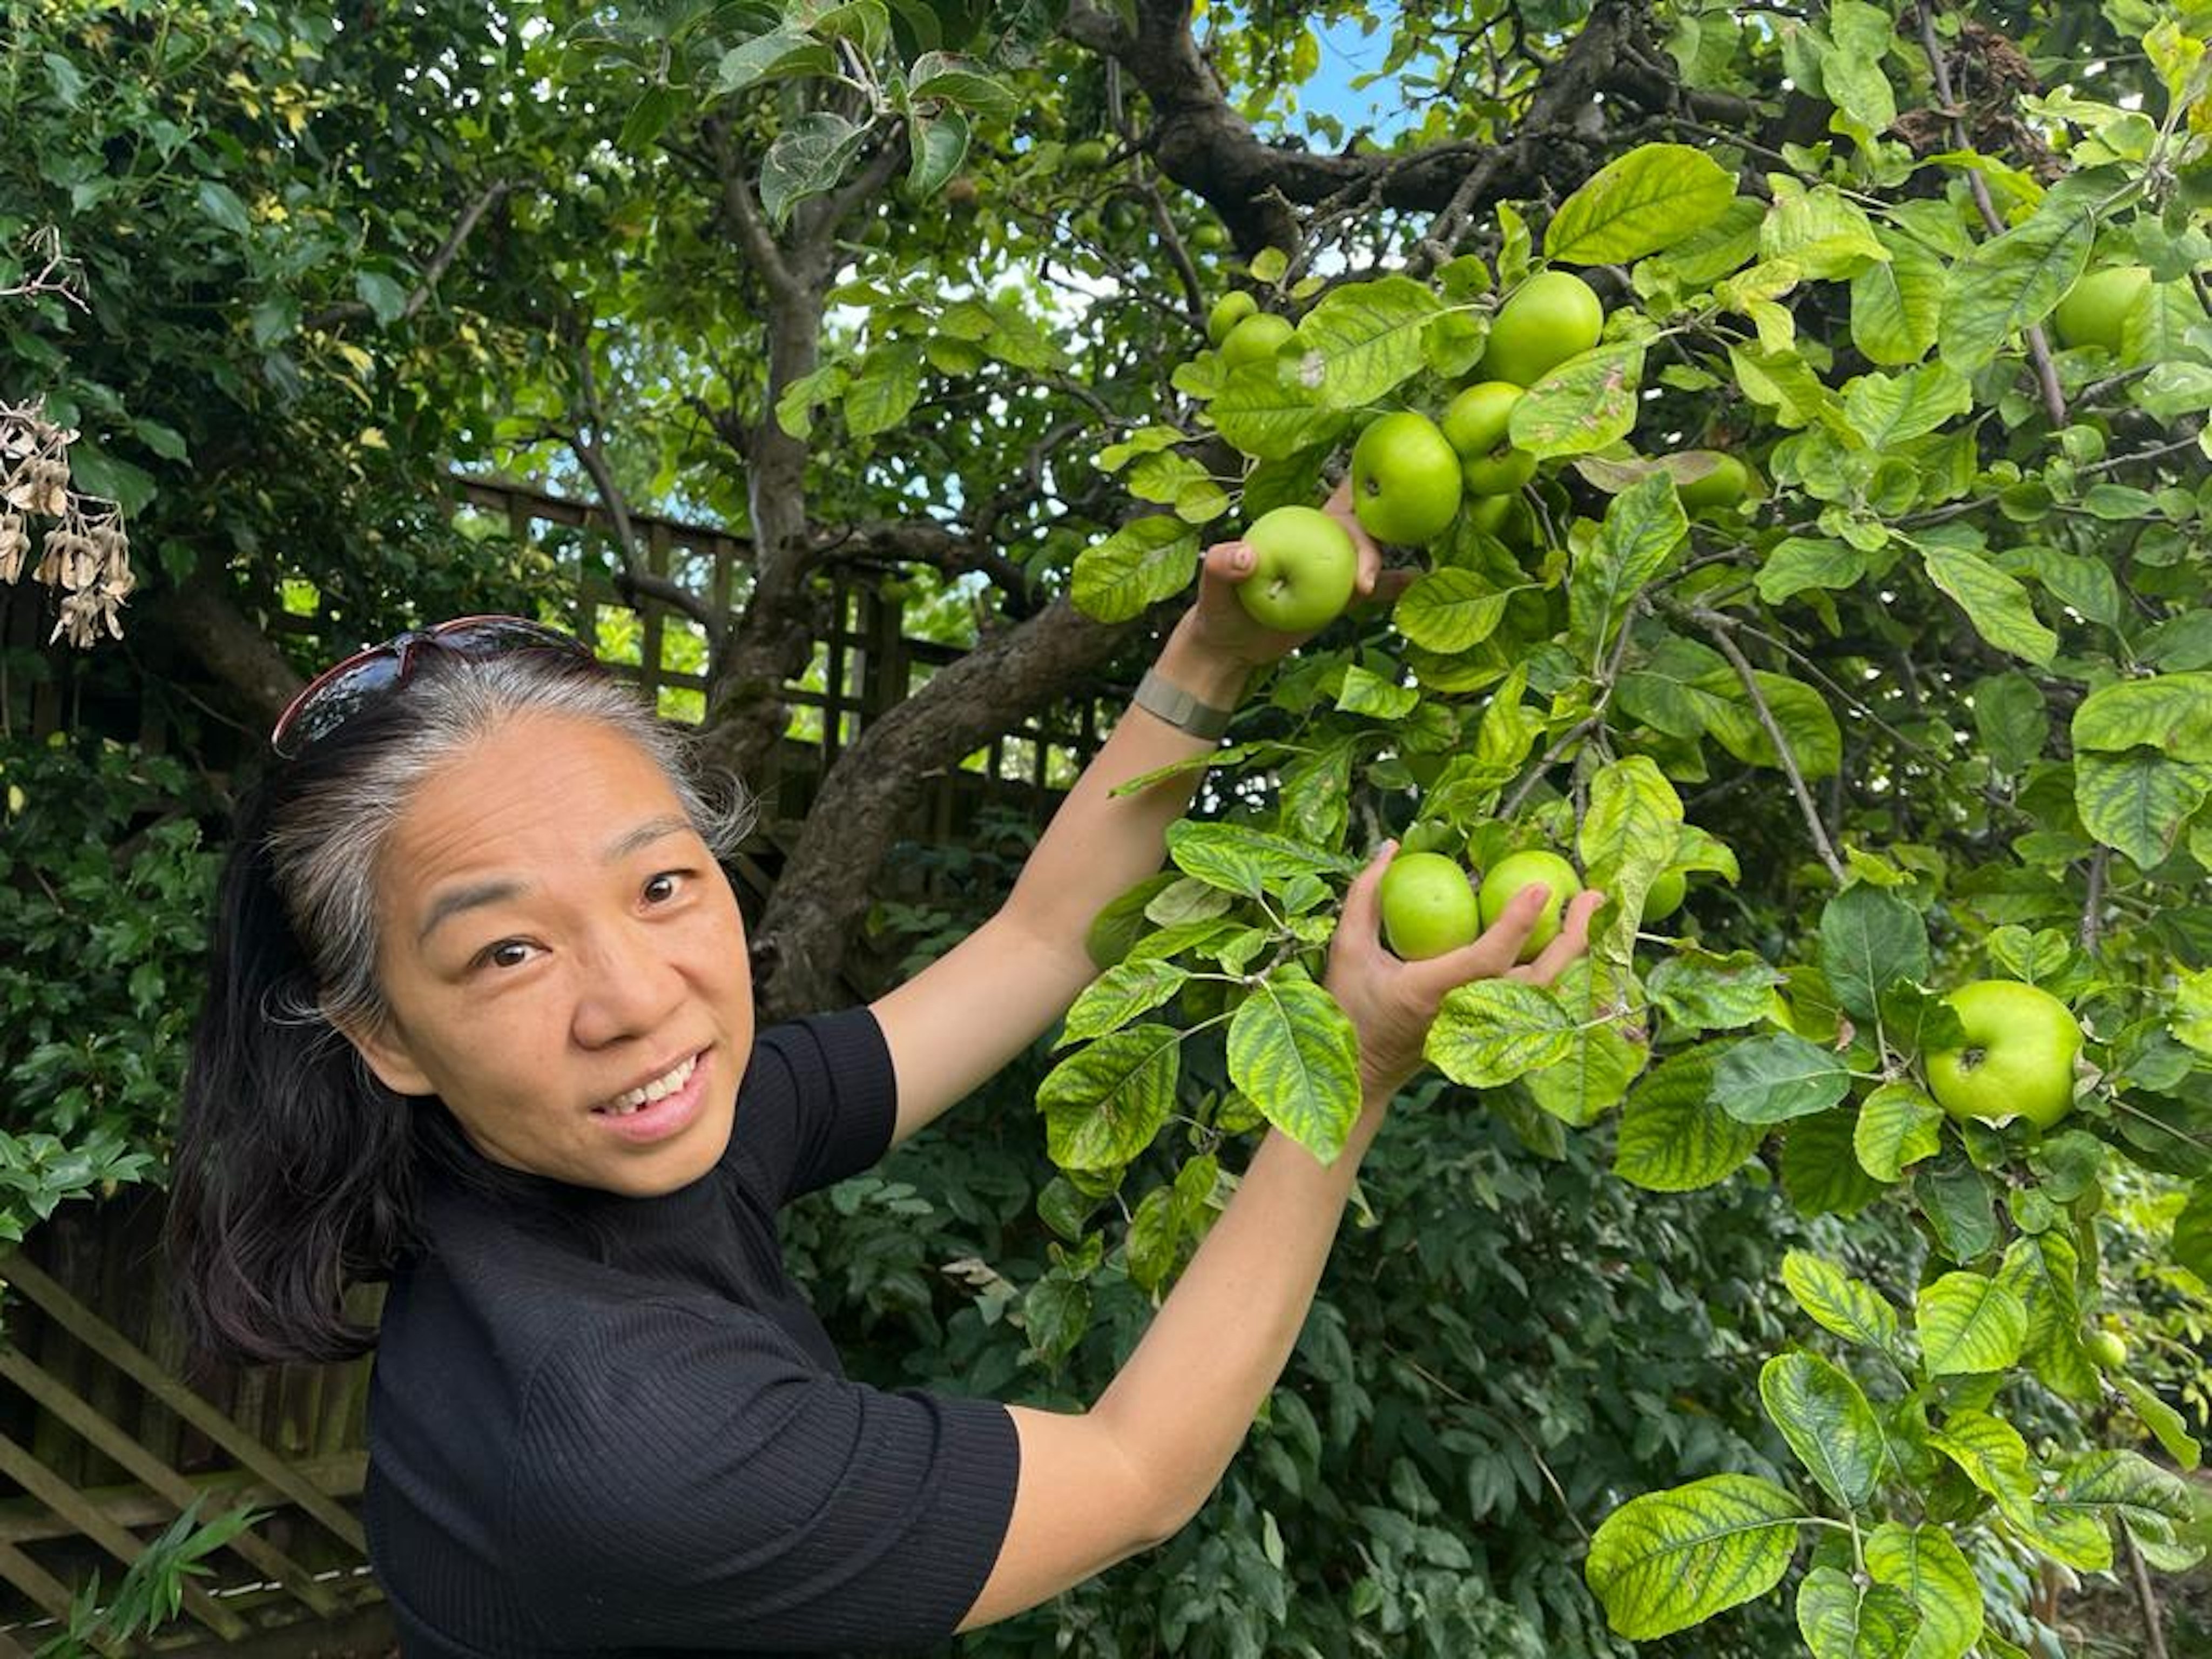 Kitty Wong picks apples from a friend’s tree in the UK, where she is spending her retirement. She explains how she continues to live a happy and purposeful life after retiring, which includes studying, working part-time and volunteering. Photo: Kitty Wong